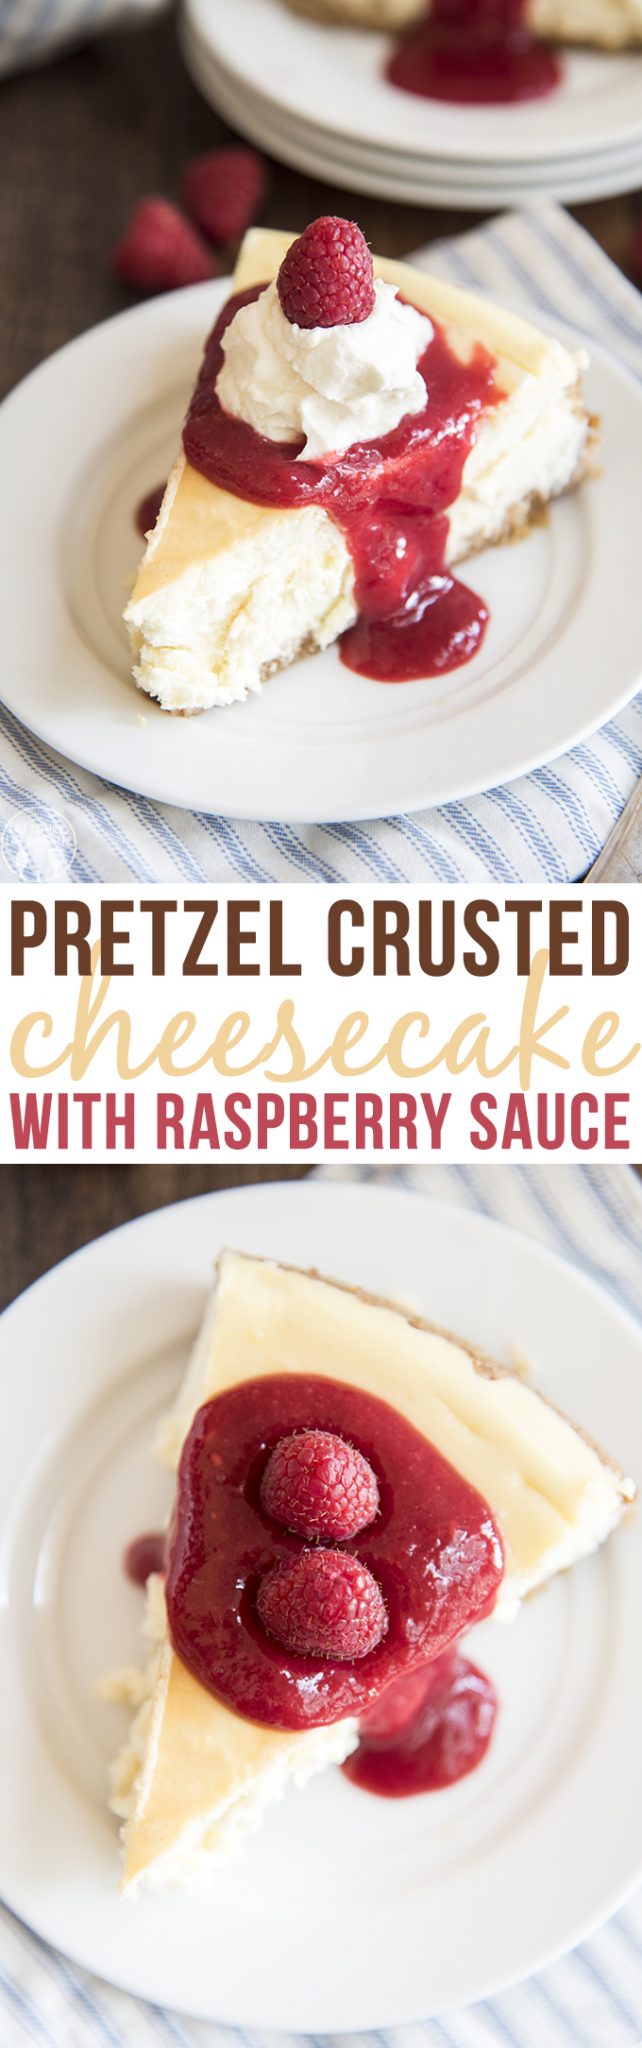 Title card for pretzel crusted cheesecake with raspberry sauce.